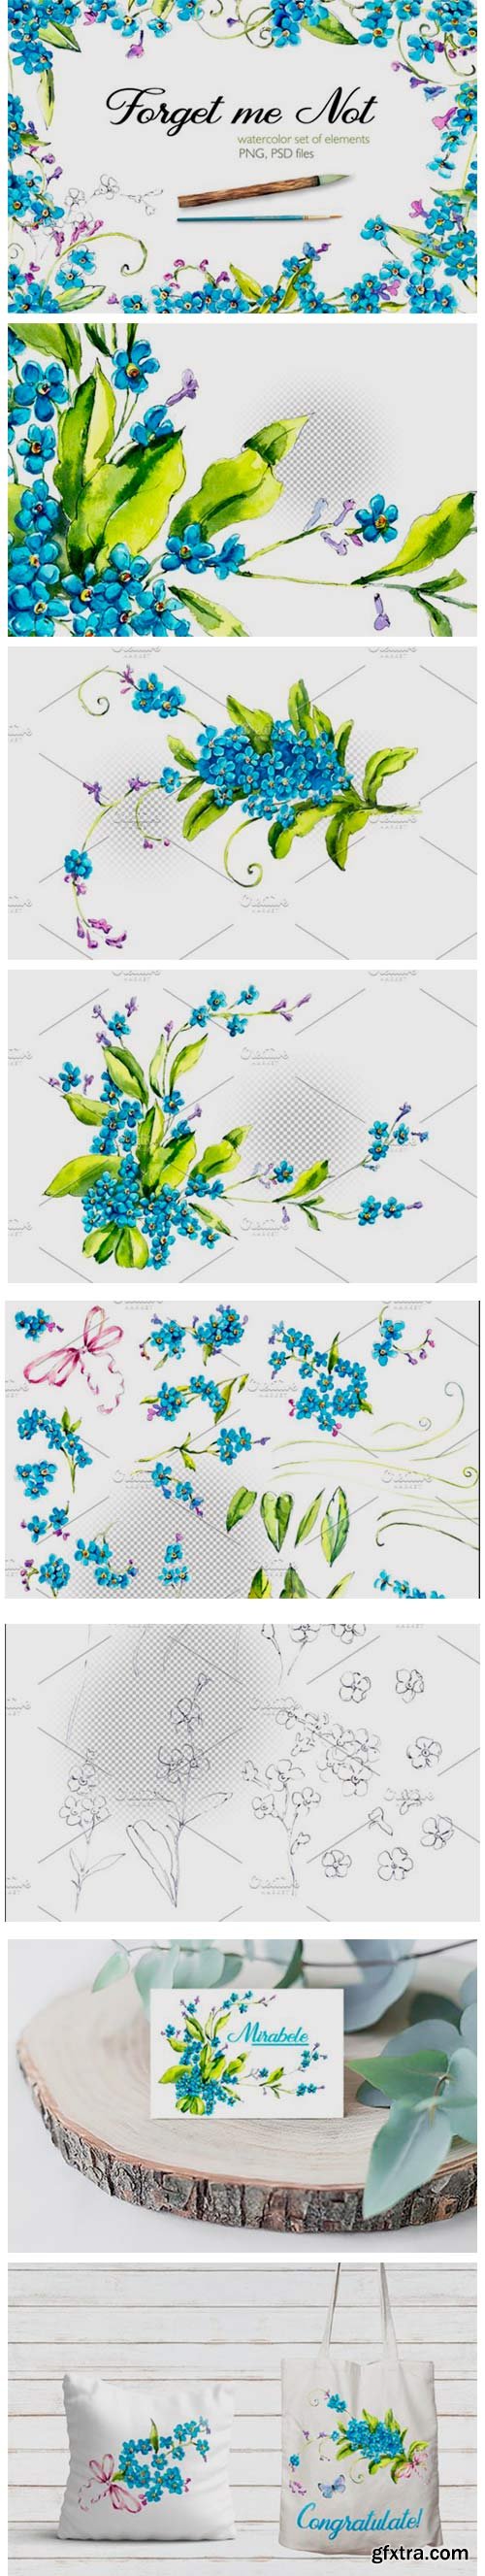 Watercolor Forget-me-nots Cliparts 4466605